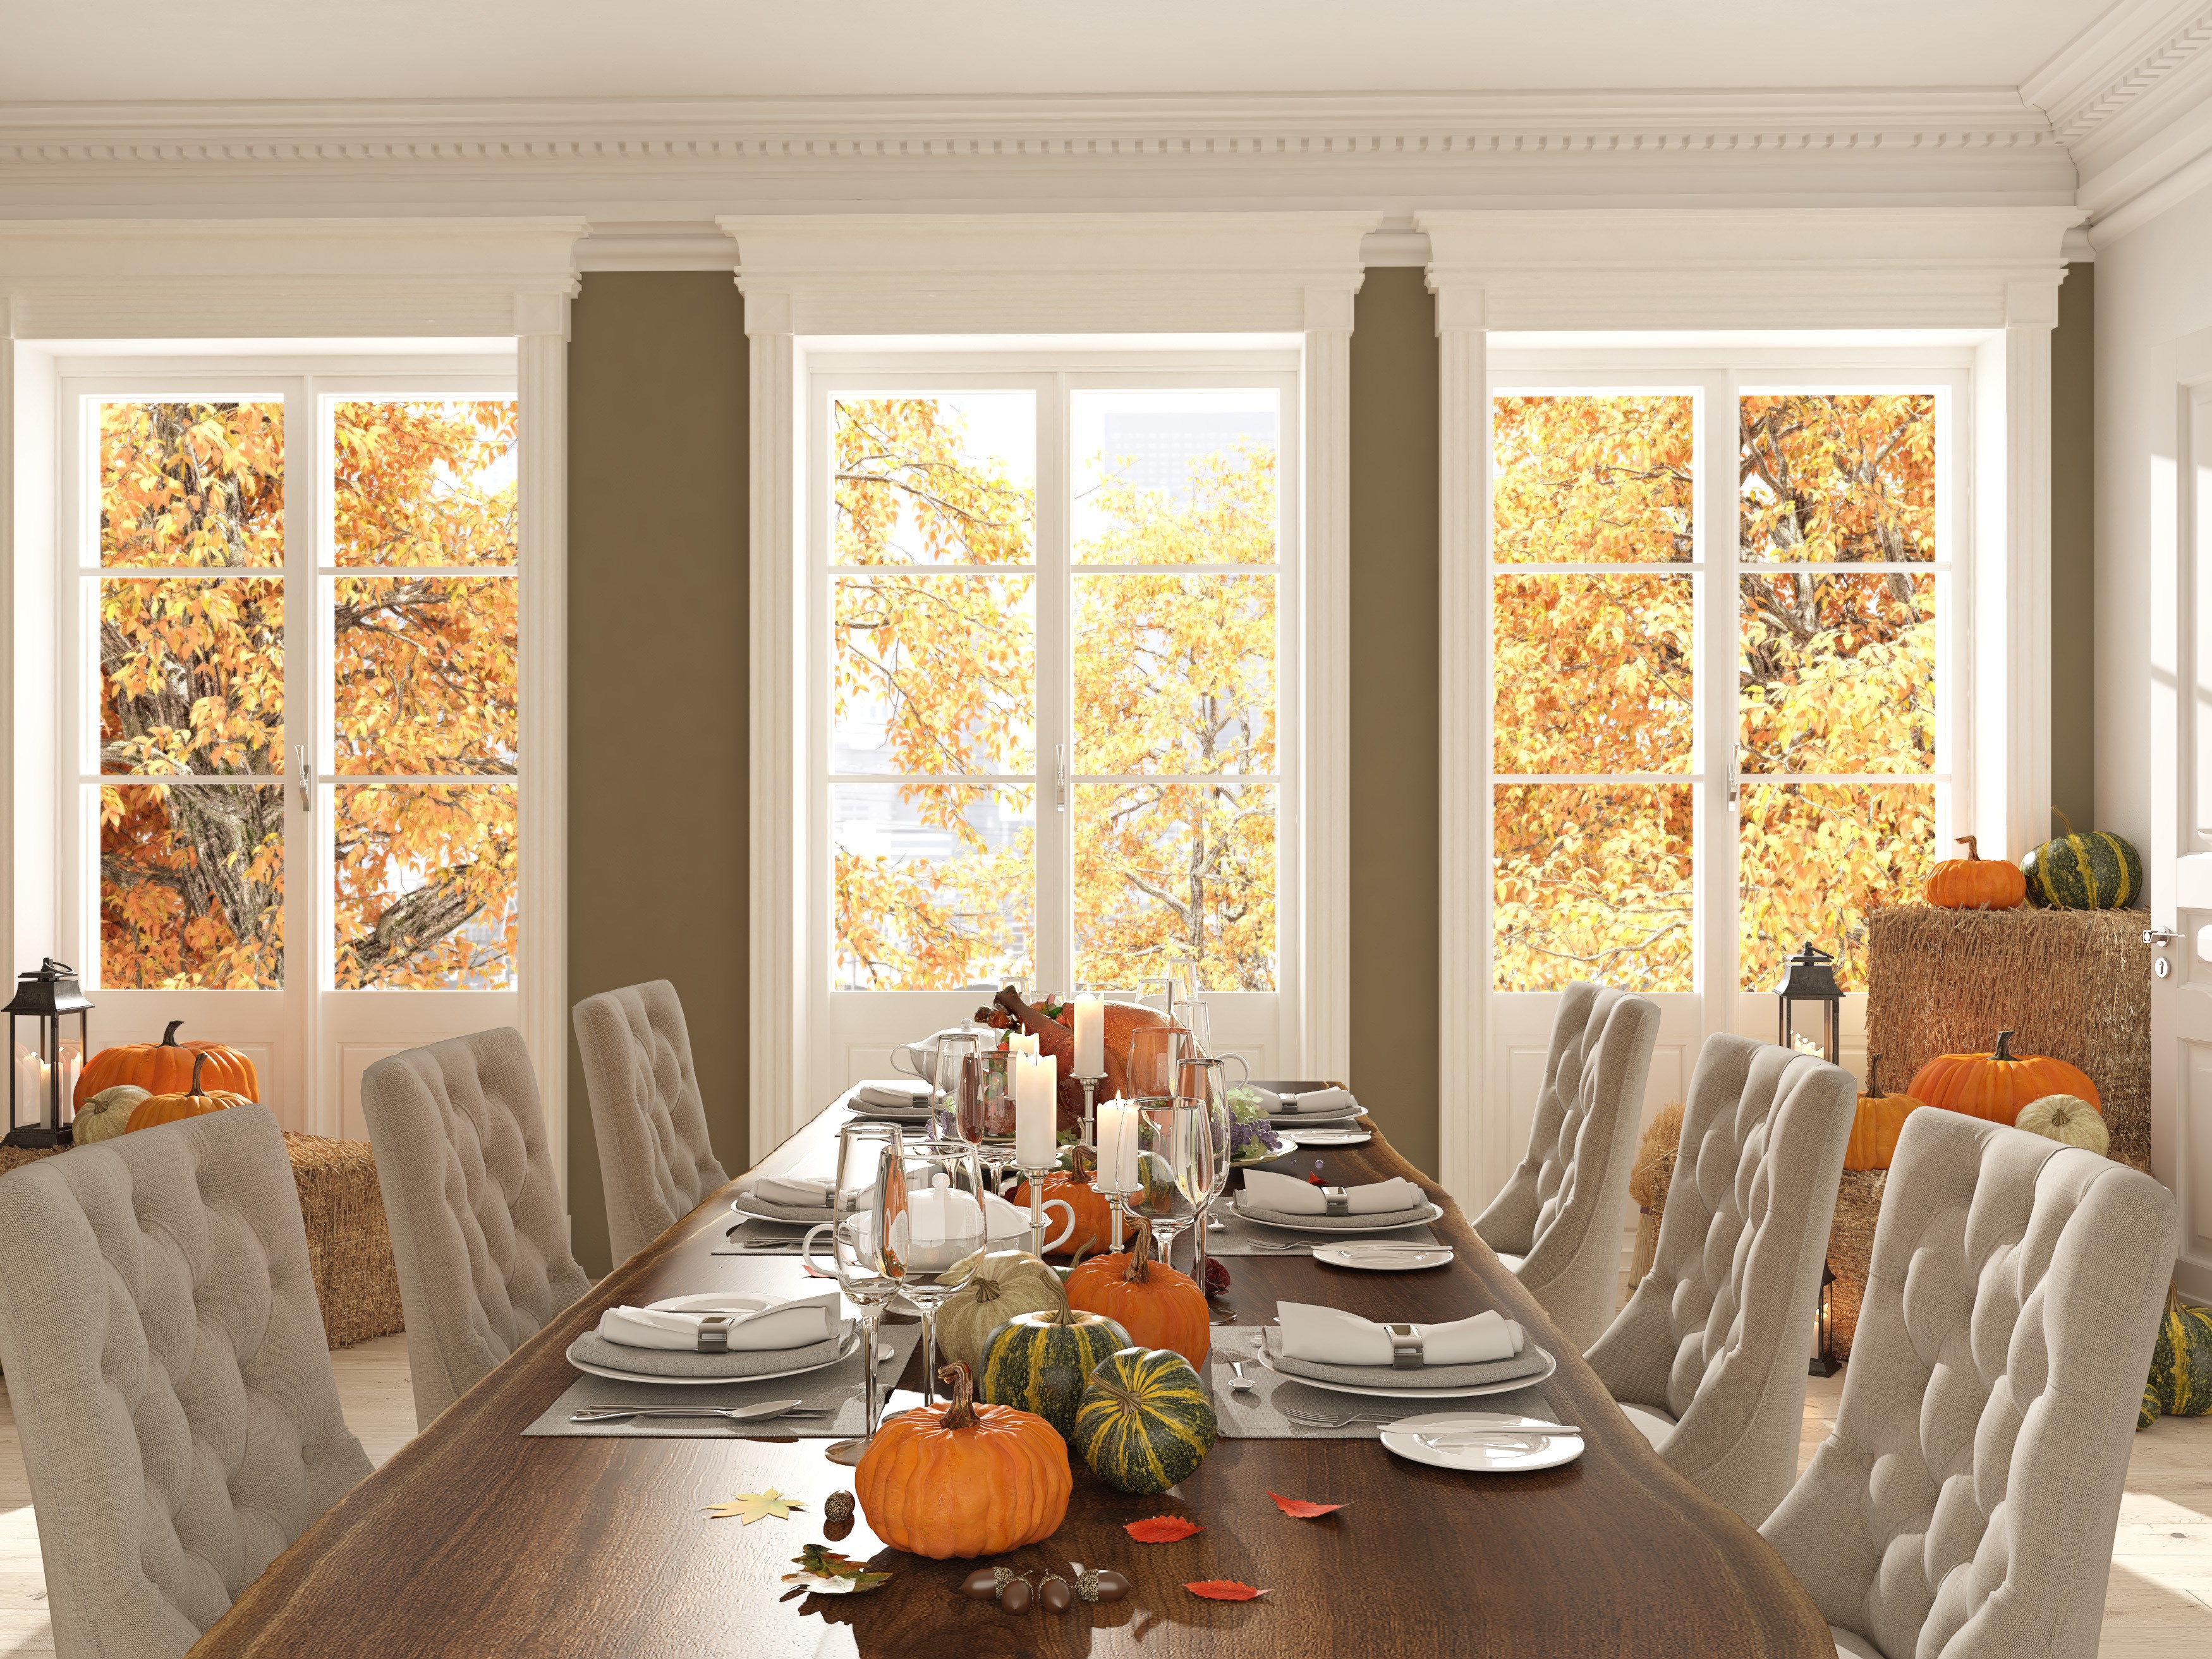 Dining room table decorated with fall decor